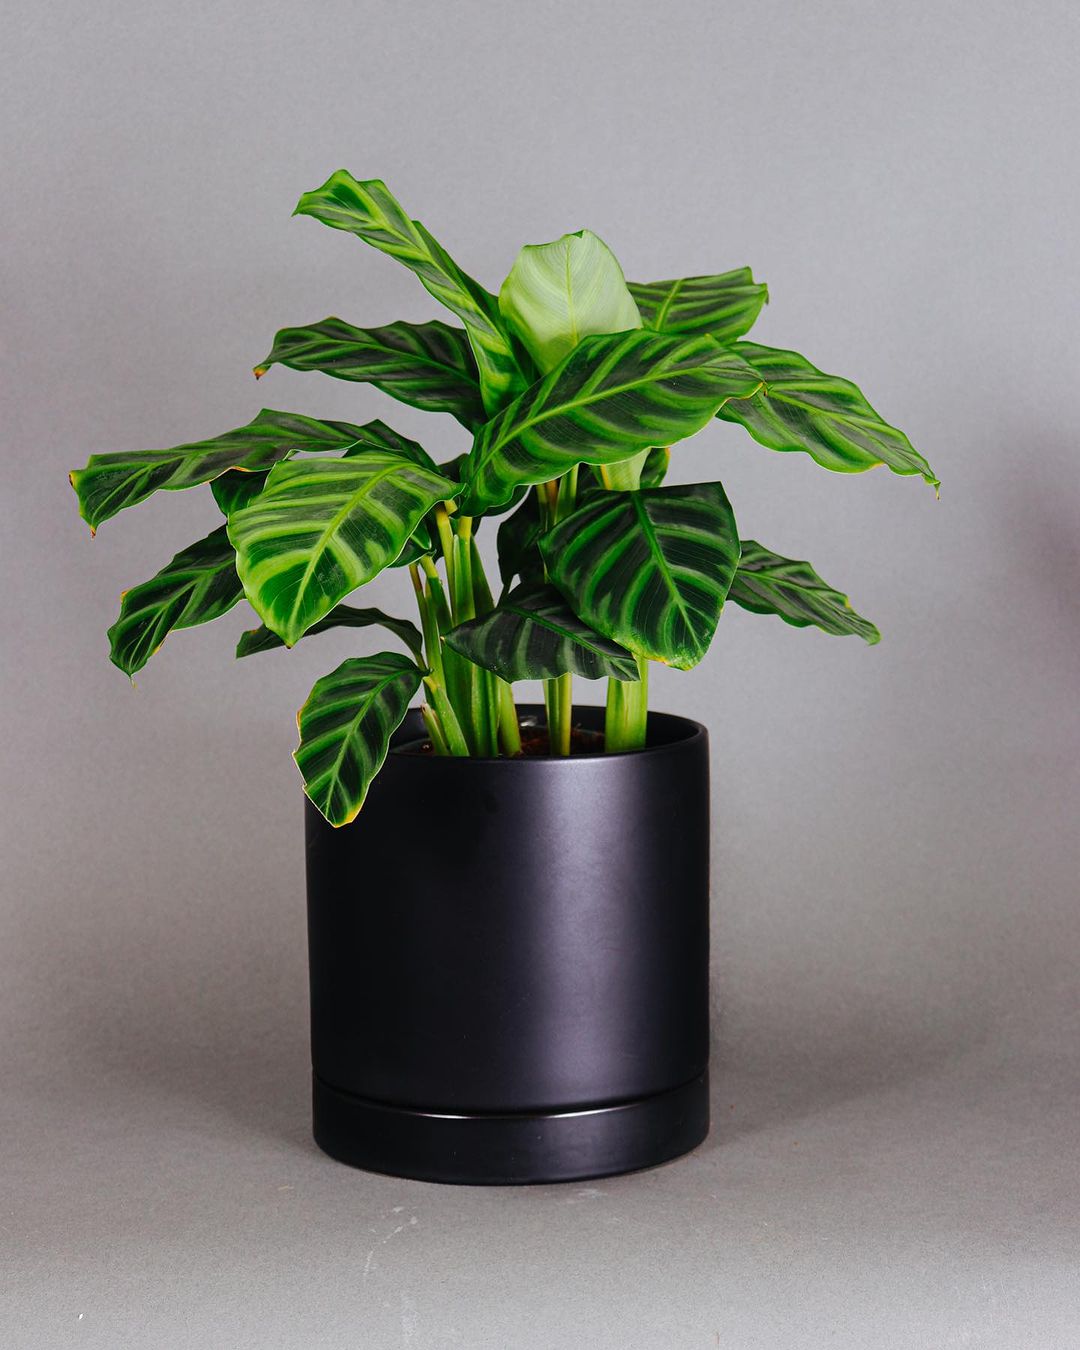 A Zebra Plant in a black pot on a grey background, adding a touch of nature to the surroundings.